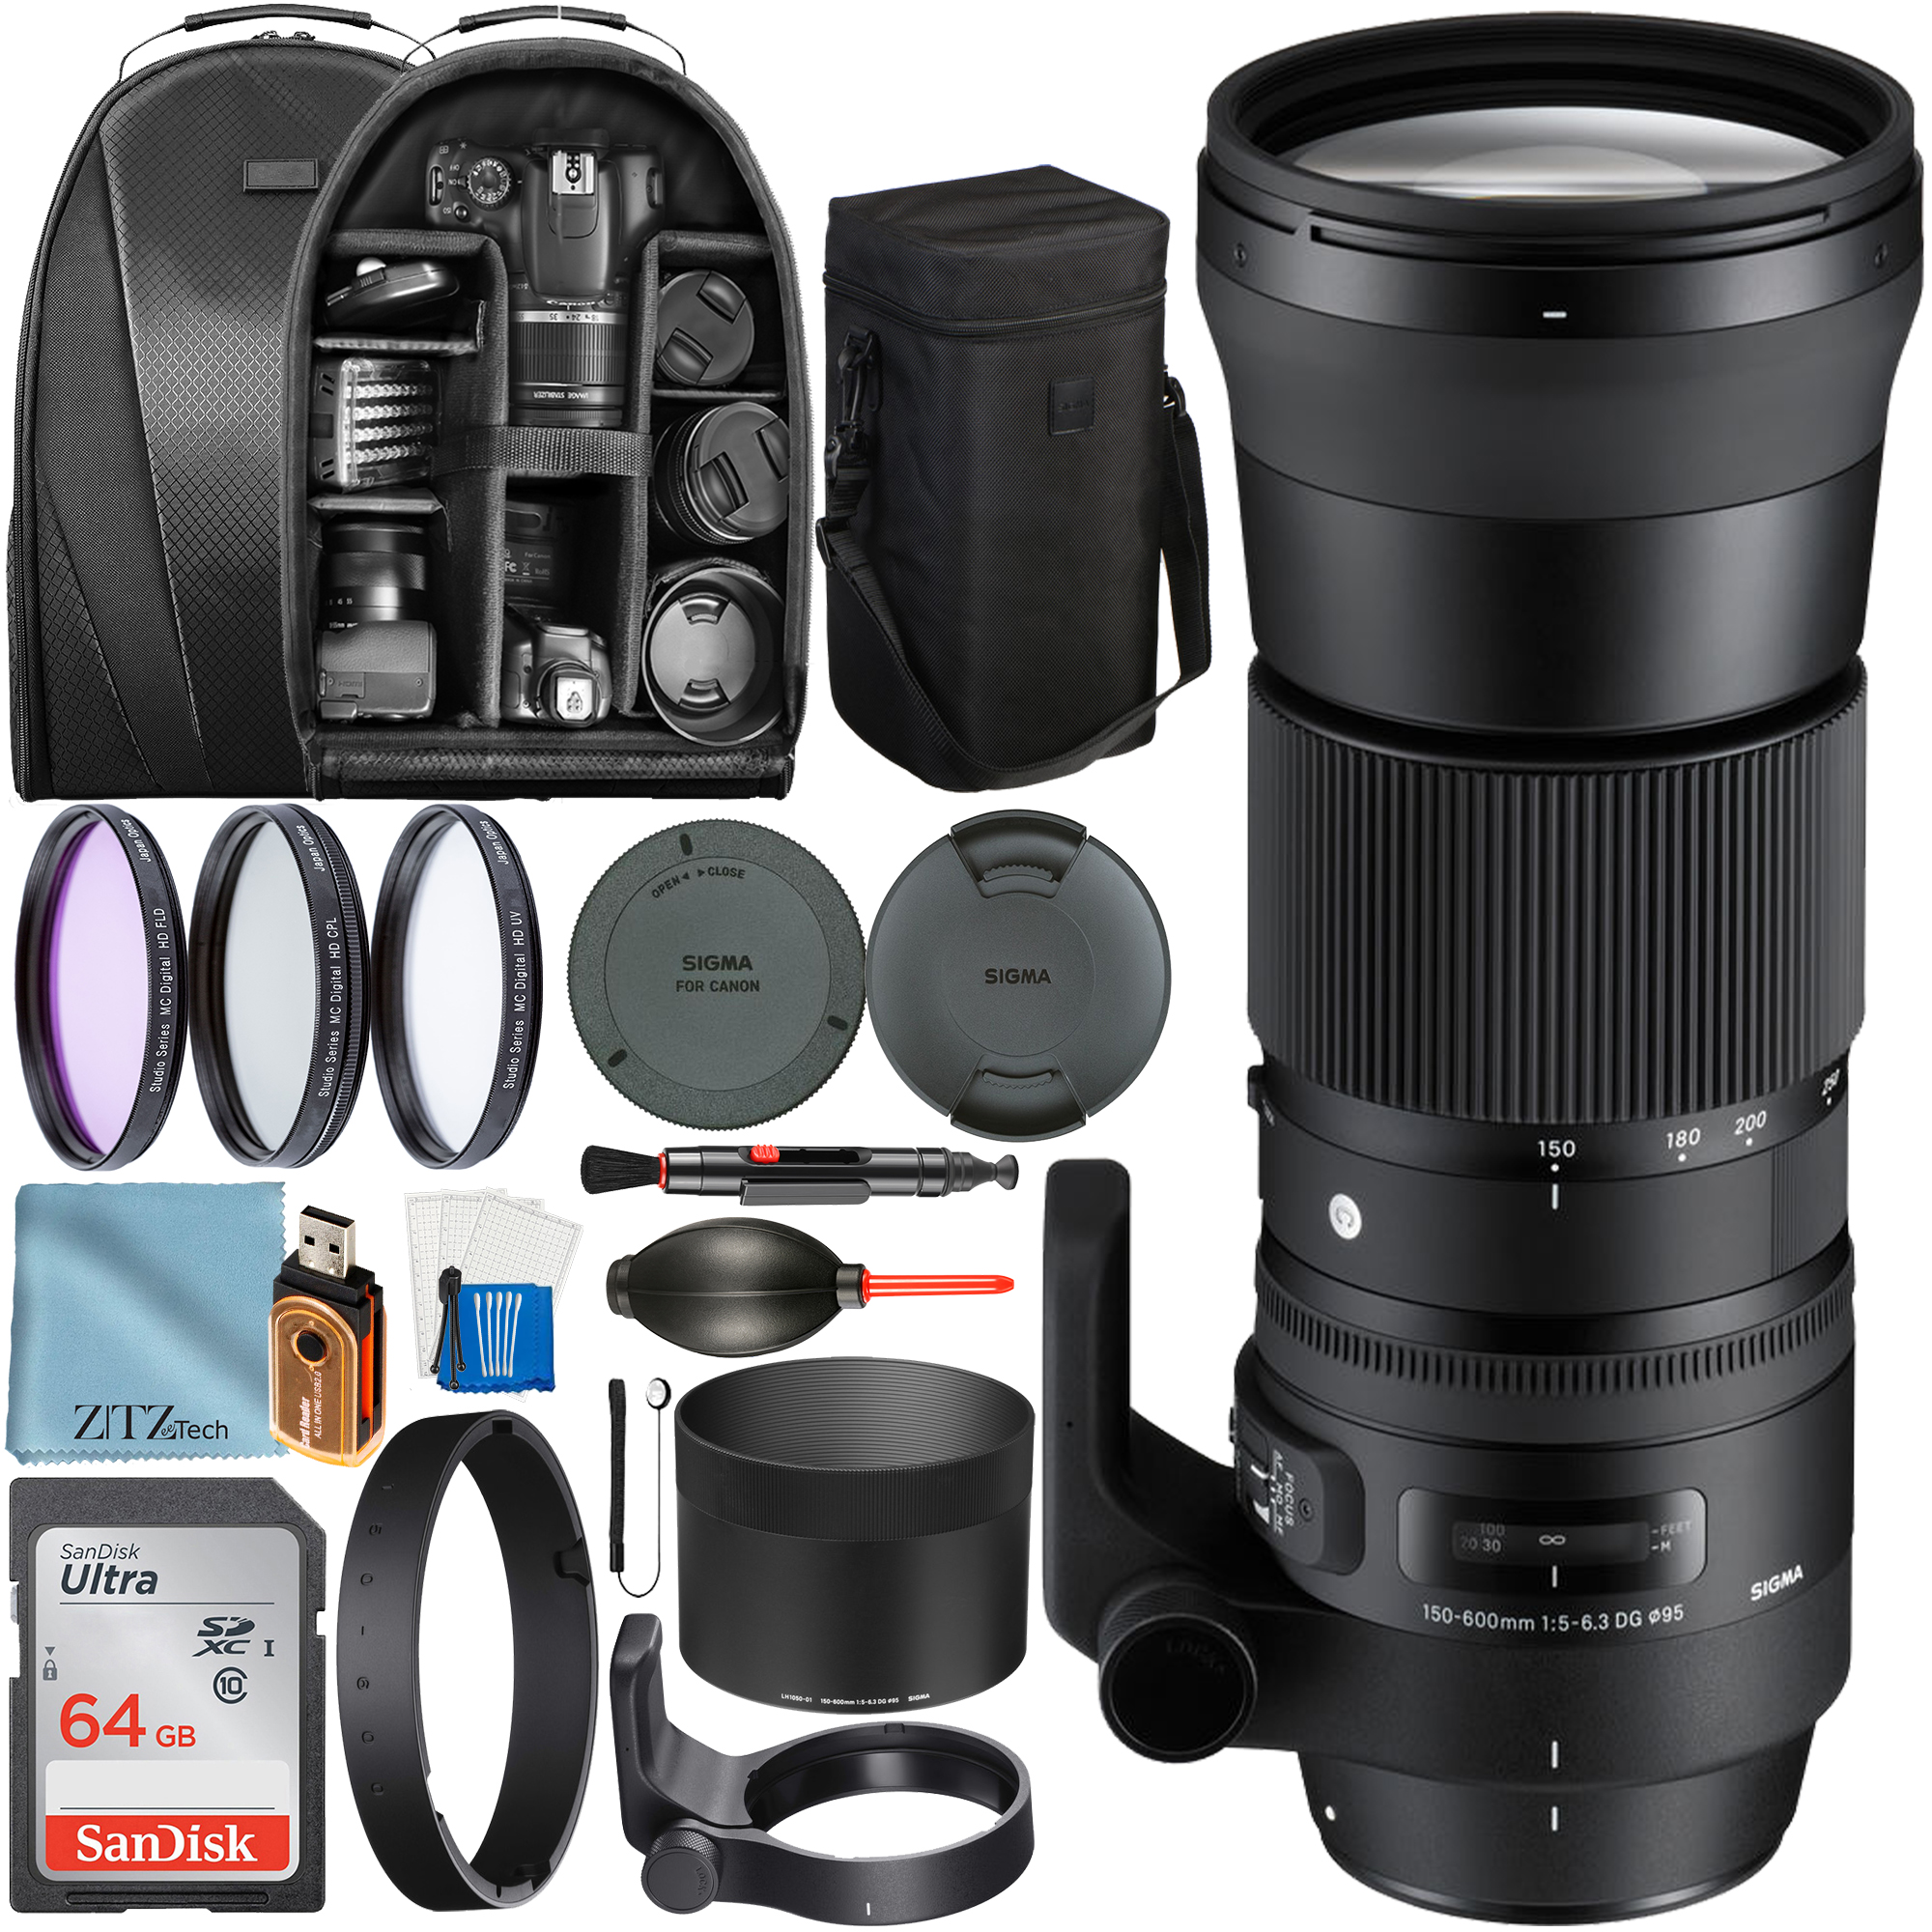 Sigma 150-600mm f/5-6.3 DG OS HSM Contemporary Lens for Canon EF with SanDisk 64GB Card + Backpack + Filter + ZeeTech Accessory